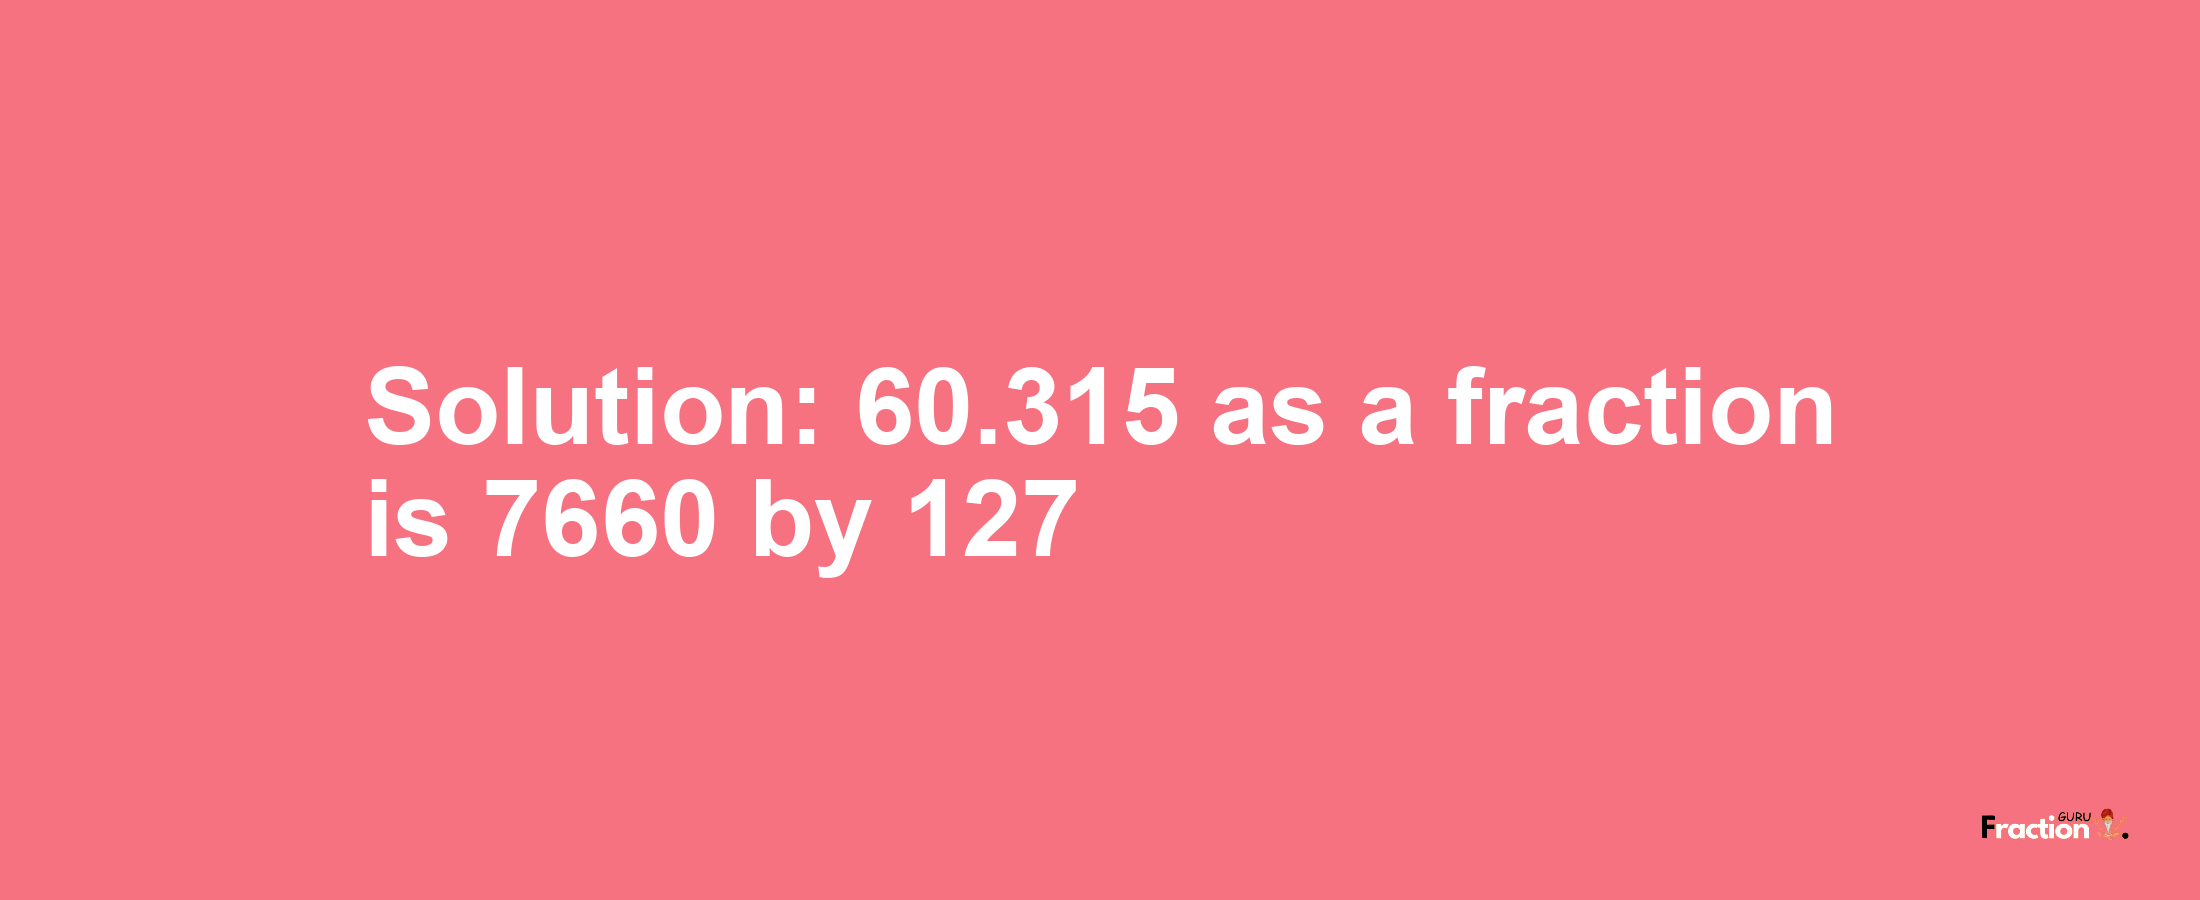 Solution:60.315 as a fraction is 7660/127